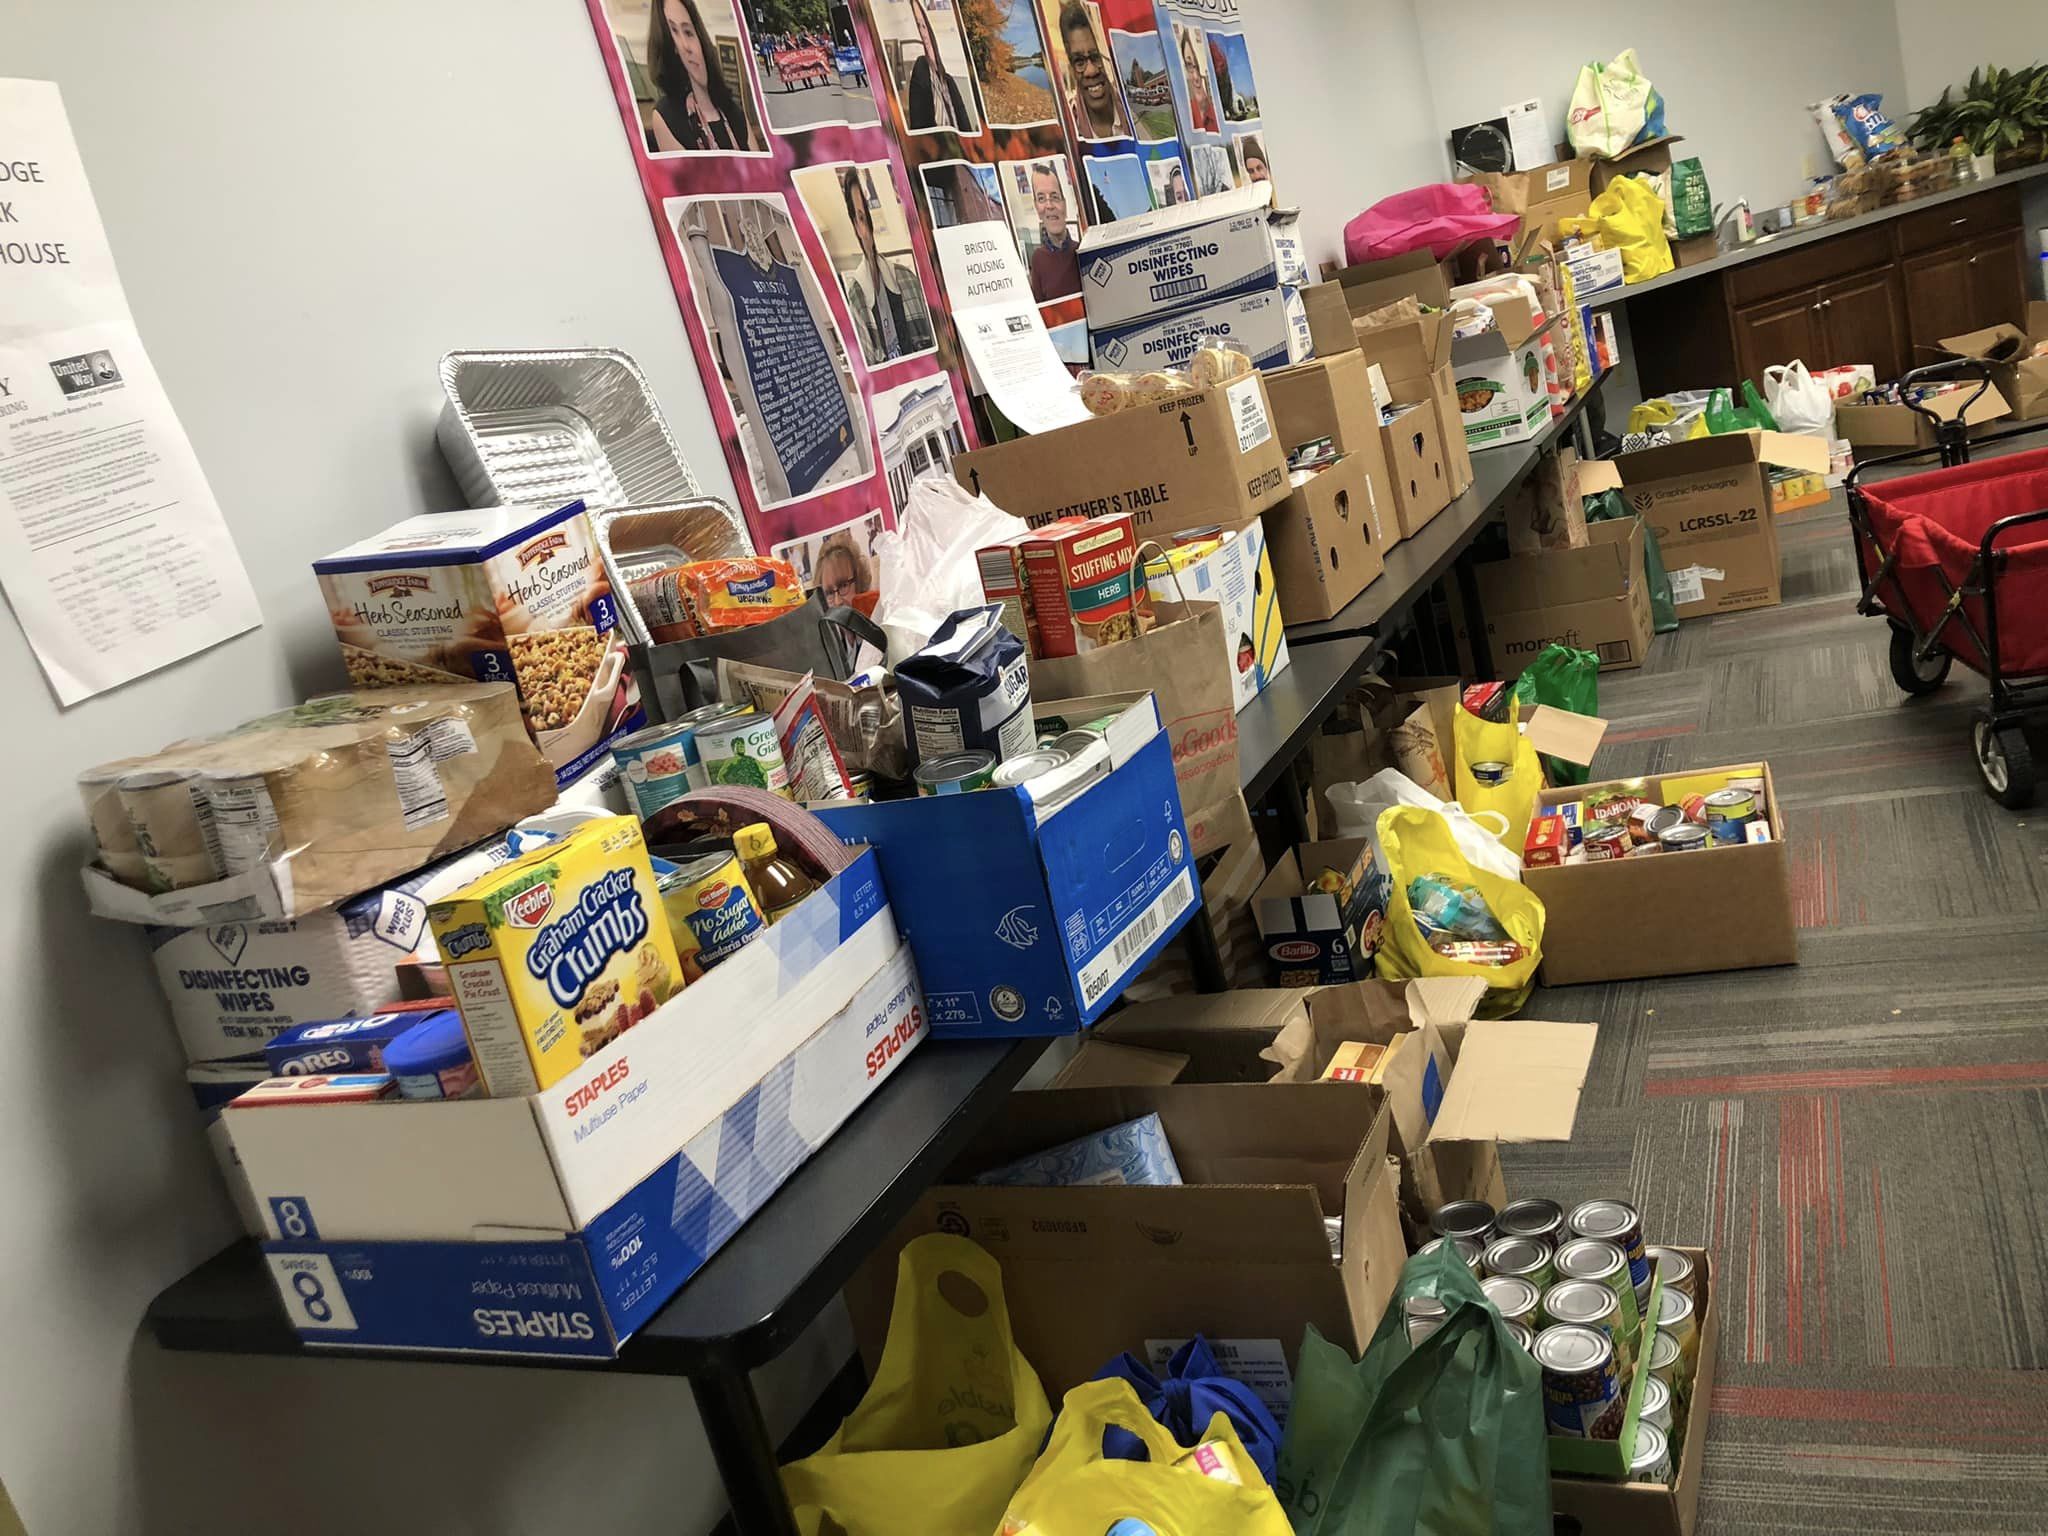 Room filled with nonperishable food donations on tables